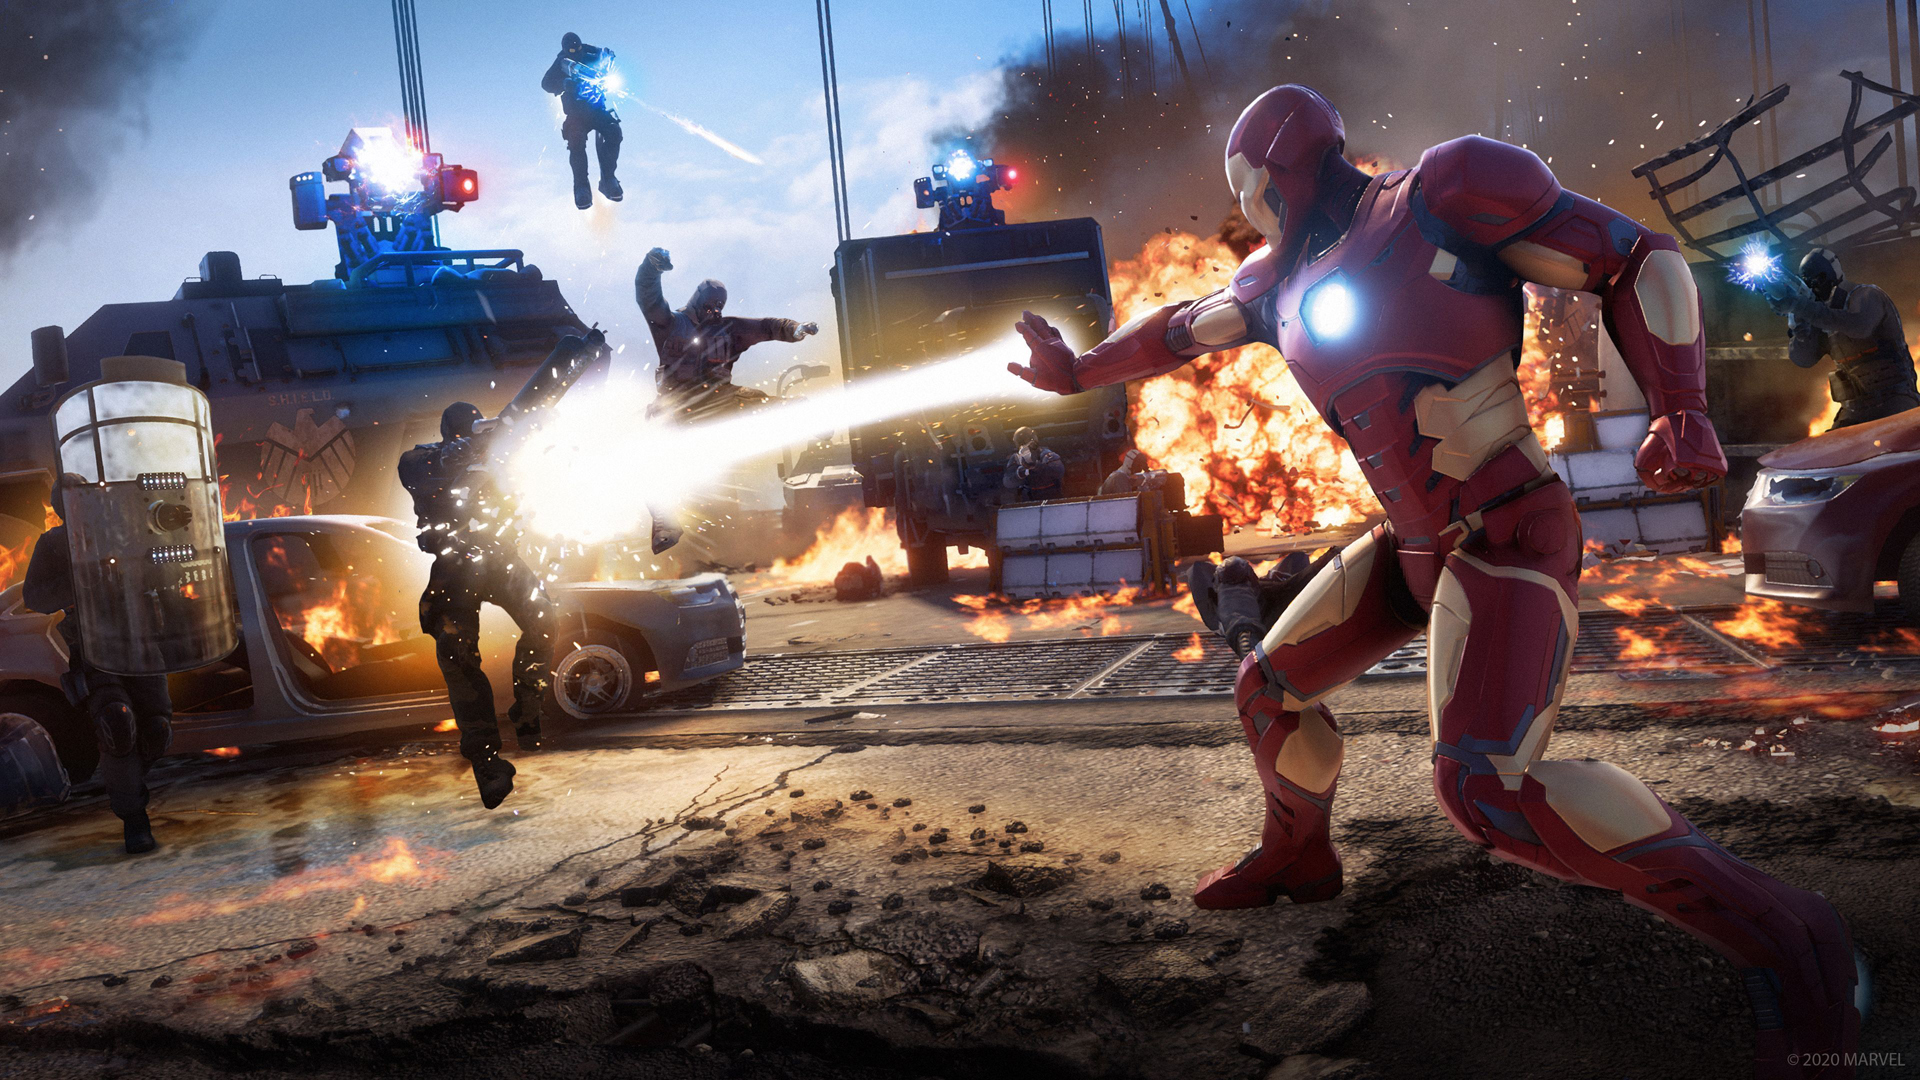 How to link your Square Enix account in Marvel's Avengers - Gamepur